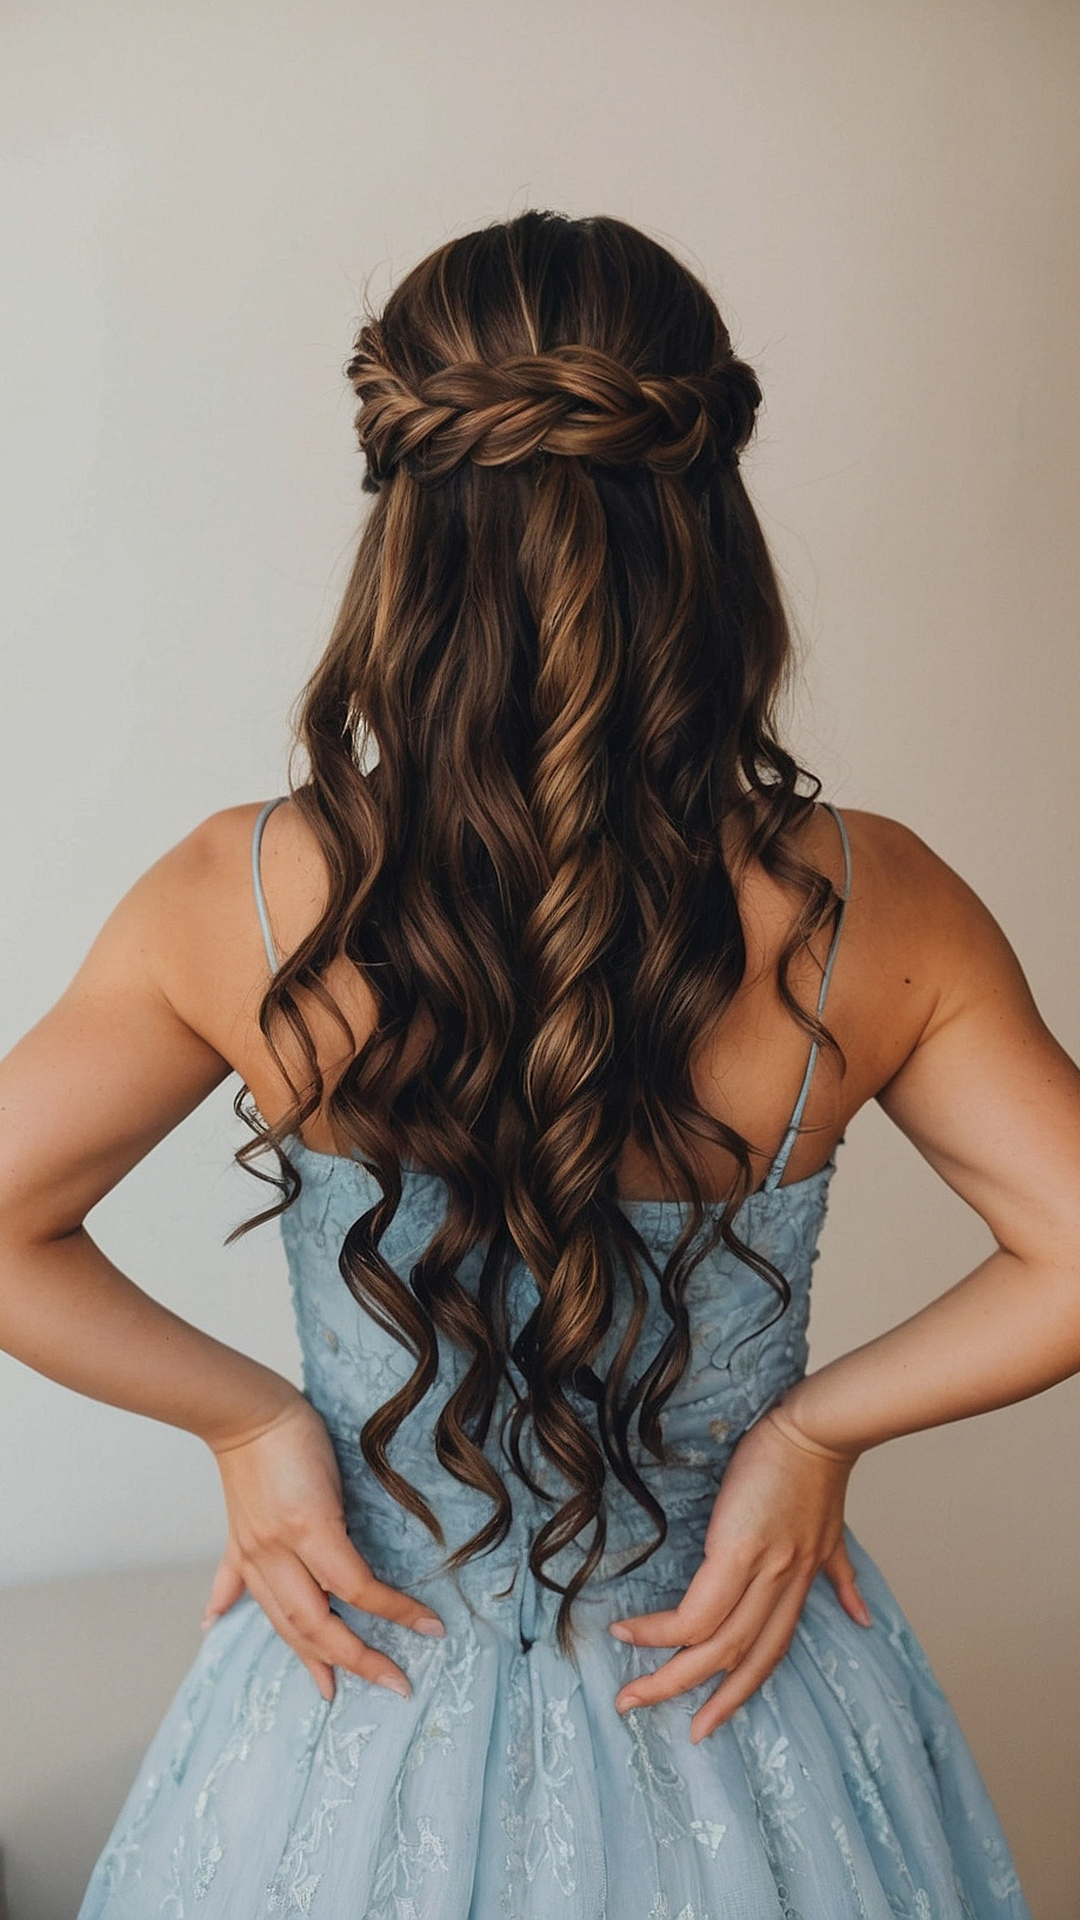 Braided Perfection: Stylish Hairstyle Inspirations